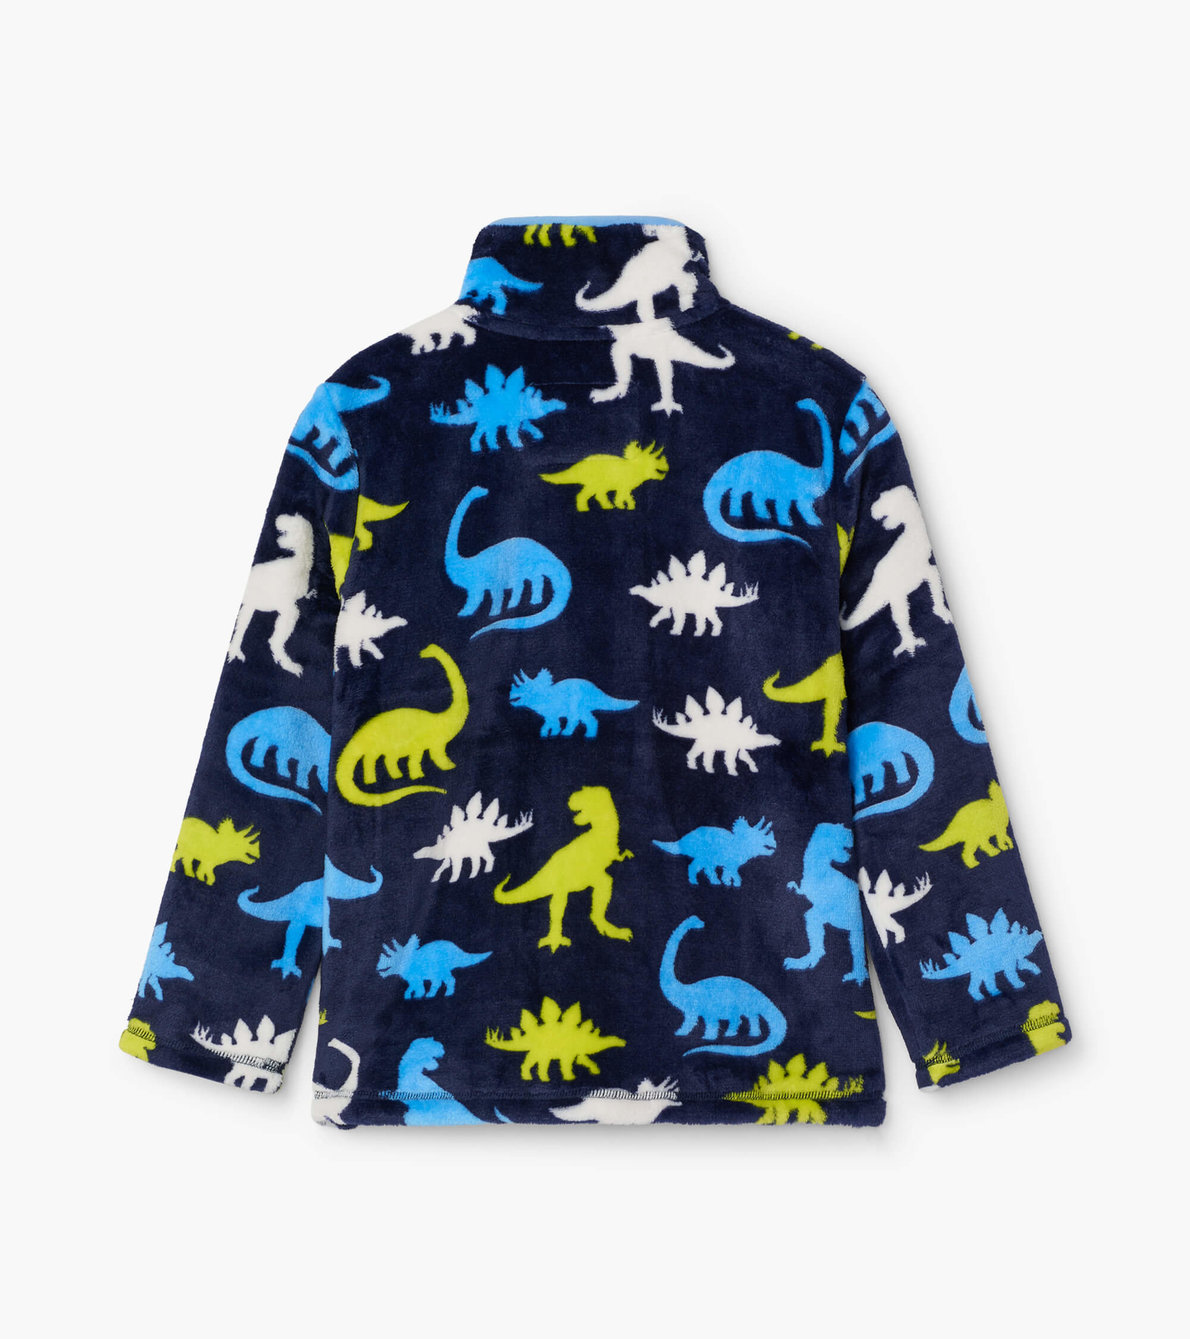 View larger image of Silhouette Dinos Fuzzy Fleece Zip Up